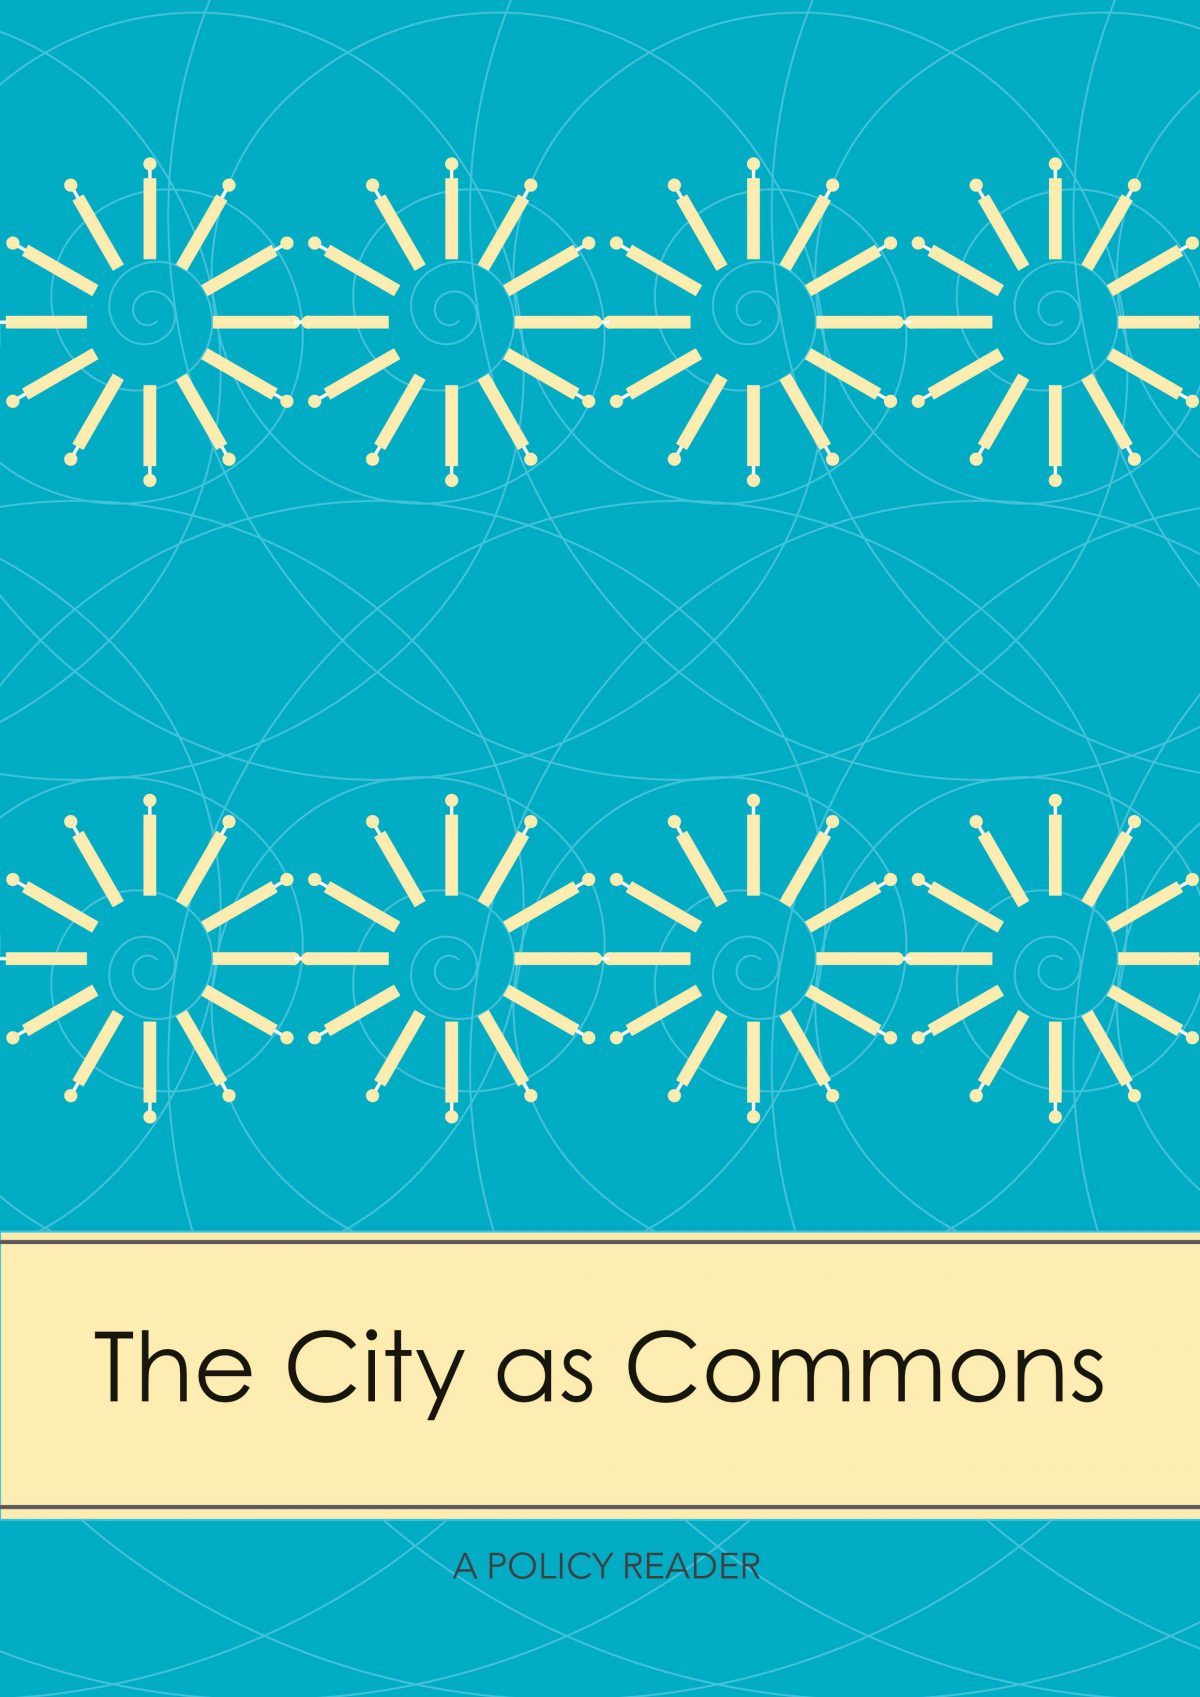 The City as Commons: a Policy Reader